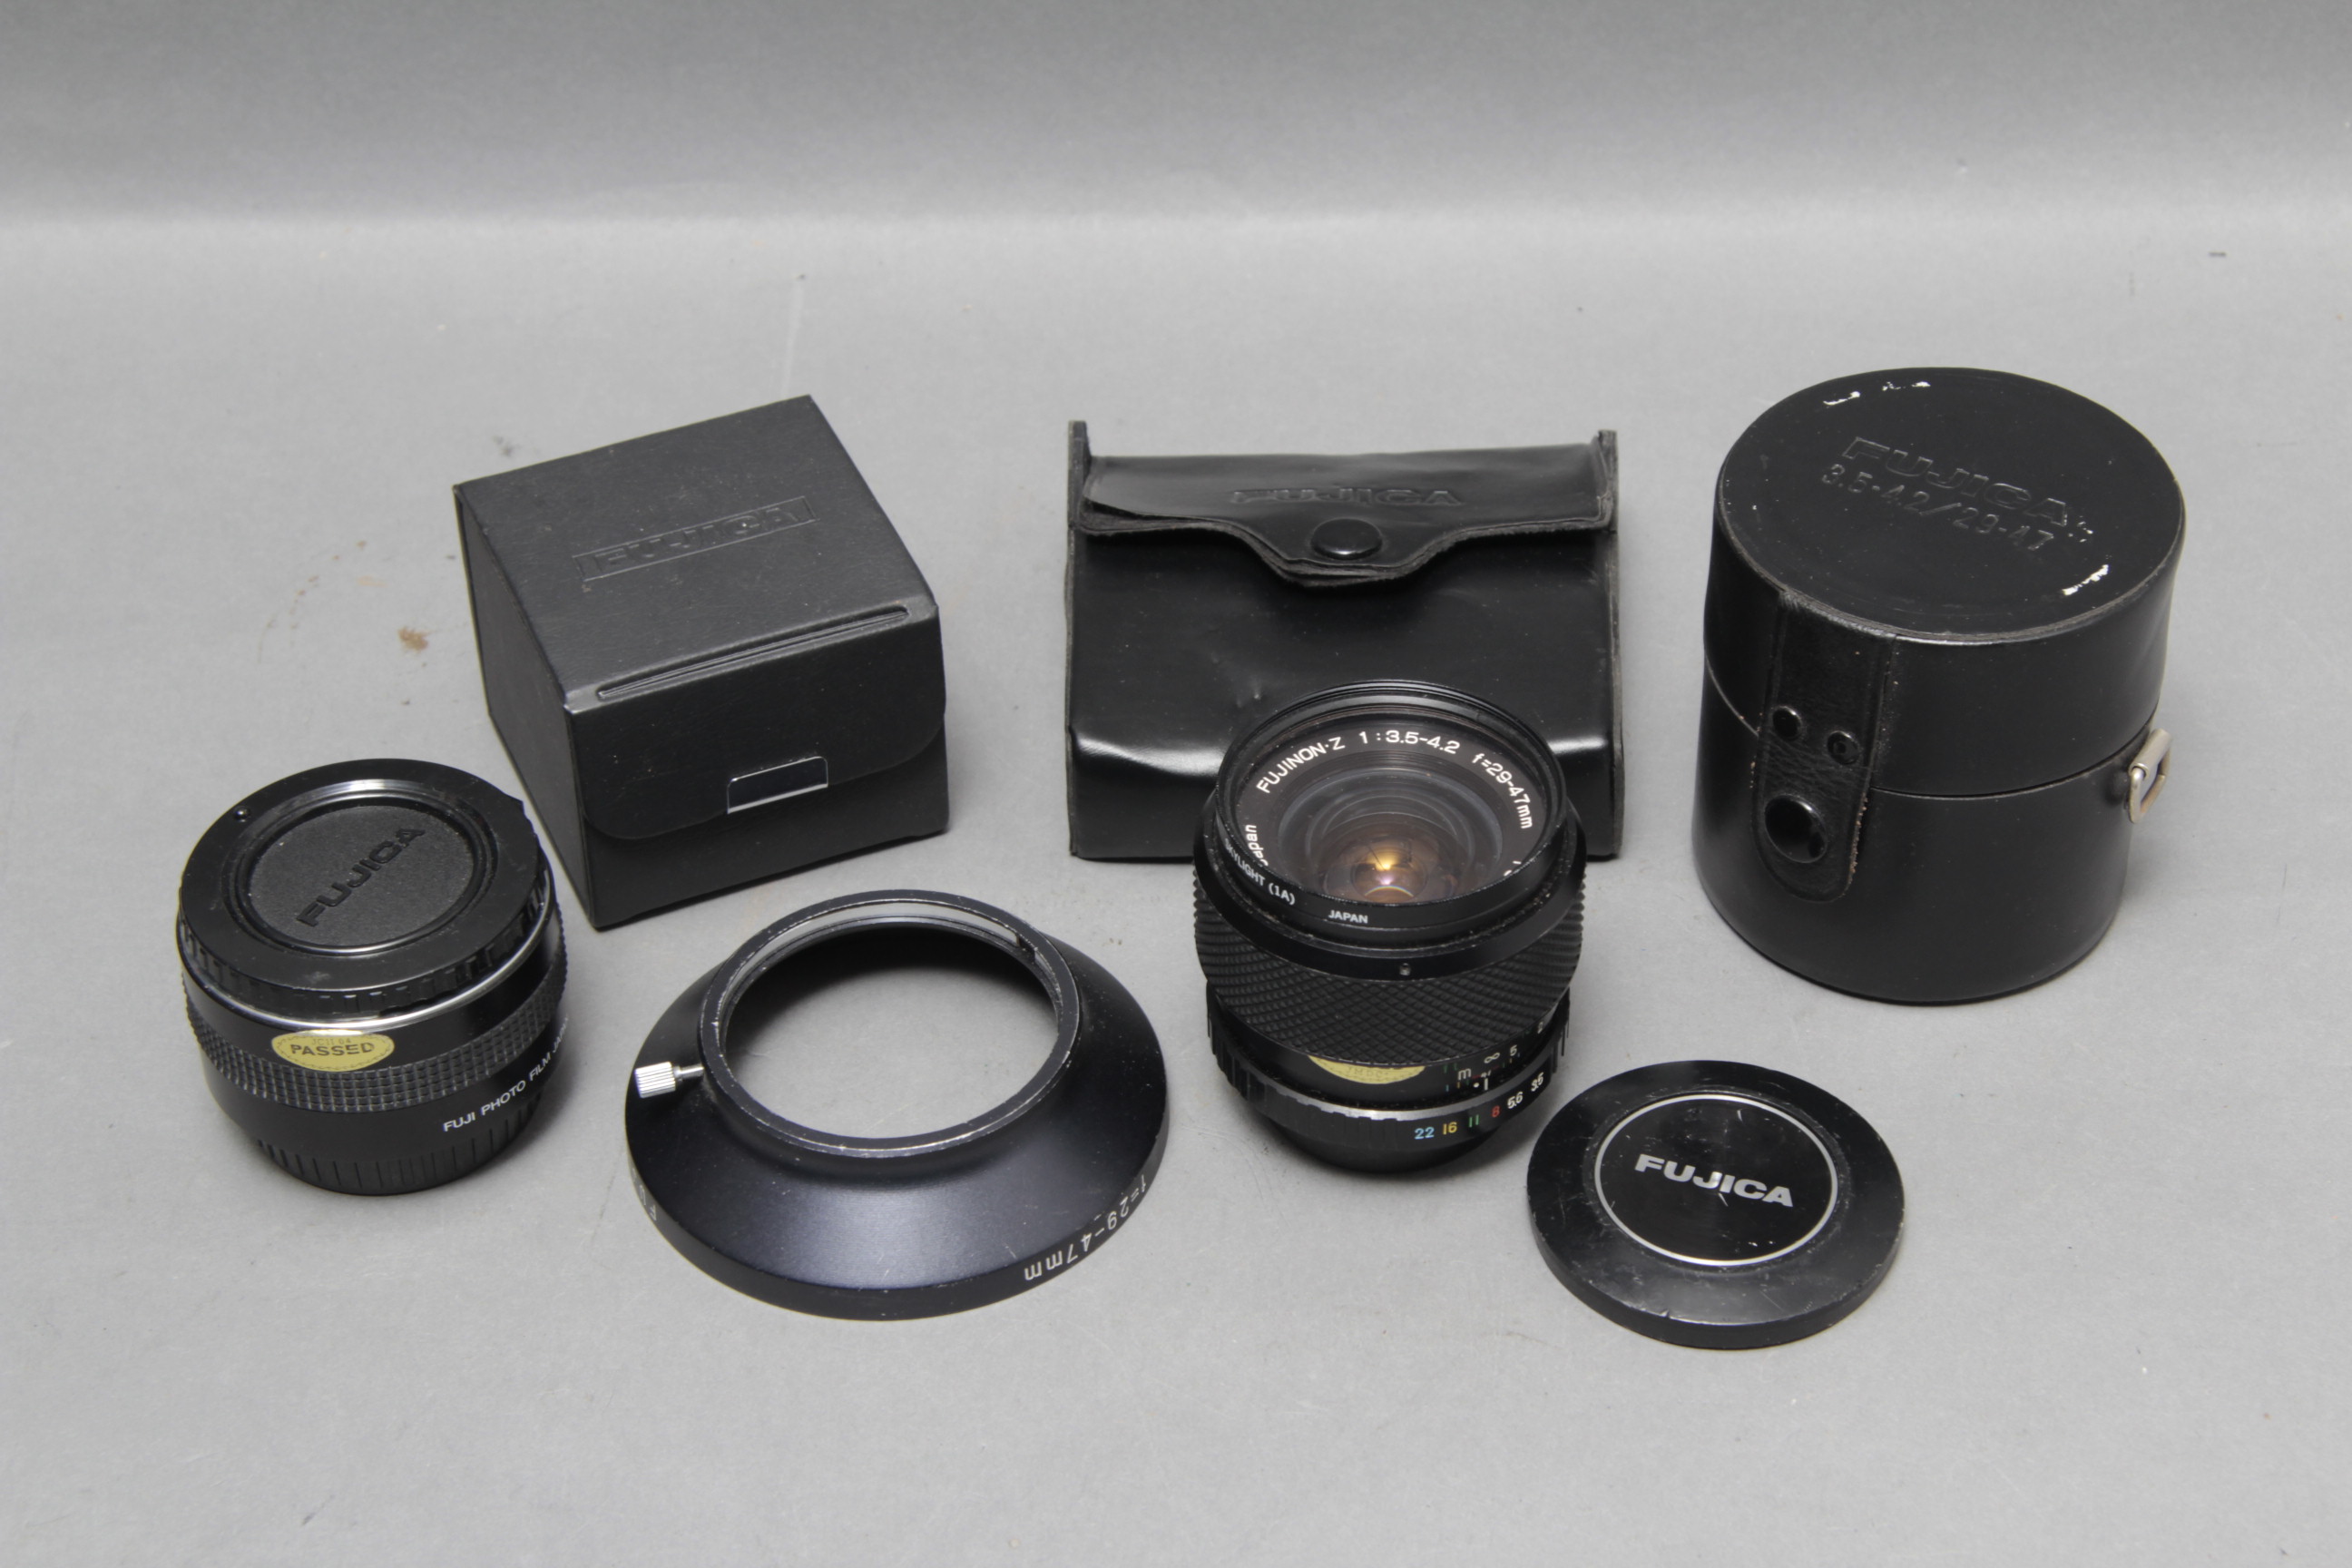 A Fujica Fujinon=z f/3.5-4.2 29-47mm Lens, complete with lens hood and teleconverter, all in maker's